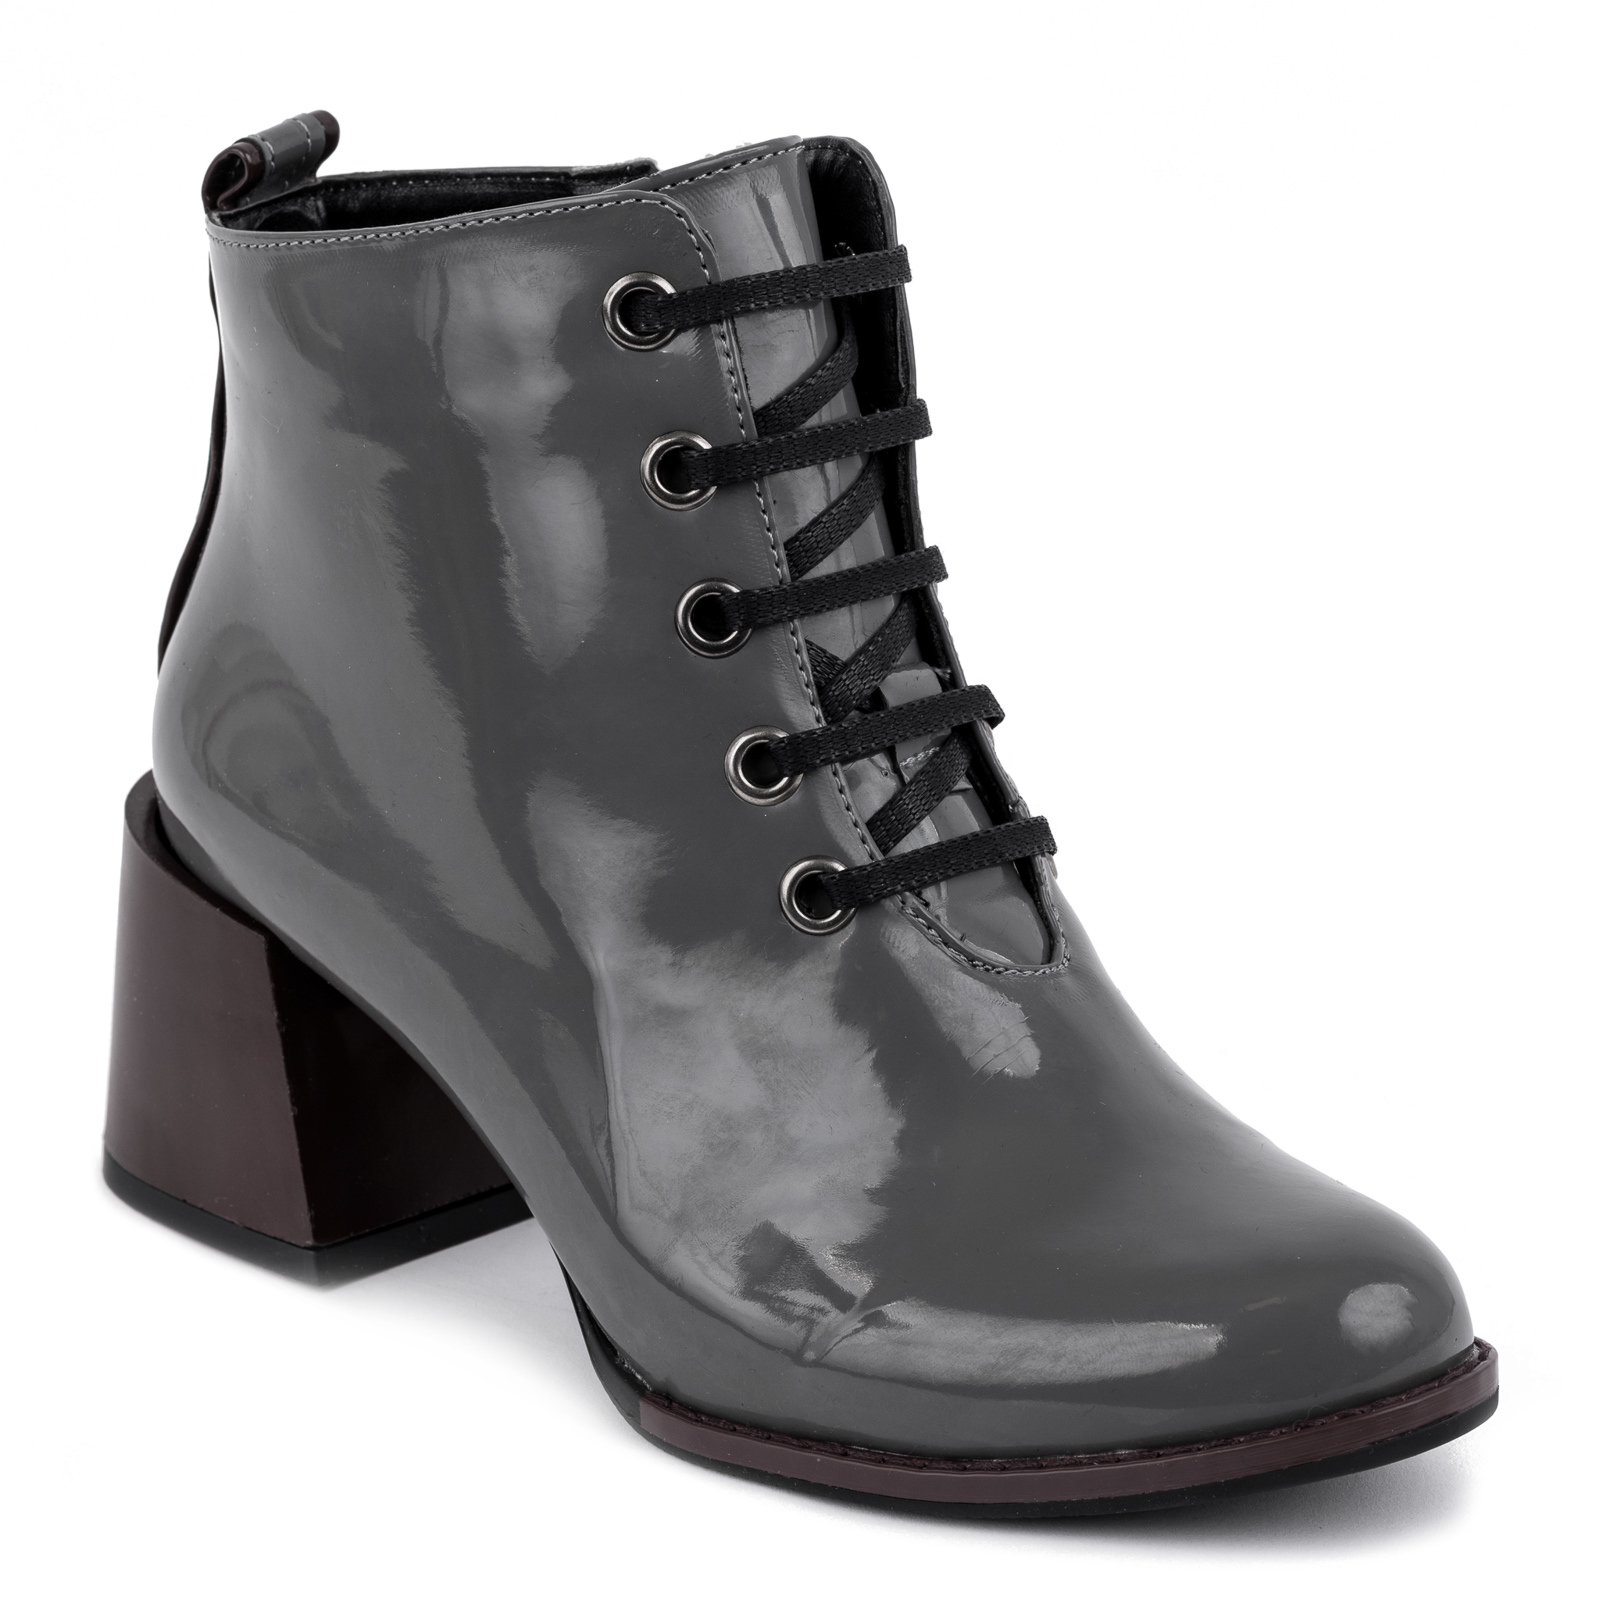 PATENT ANKLE LACE UP  BOOTS  WITH MAROON HEEL - GRAY